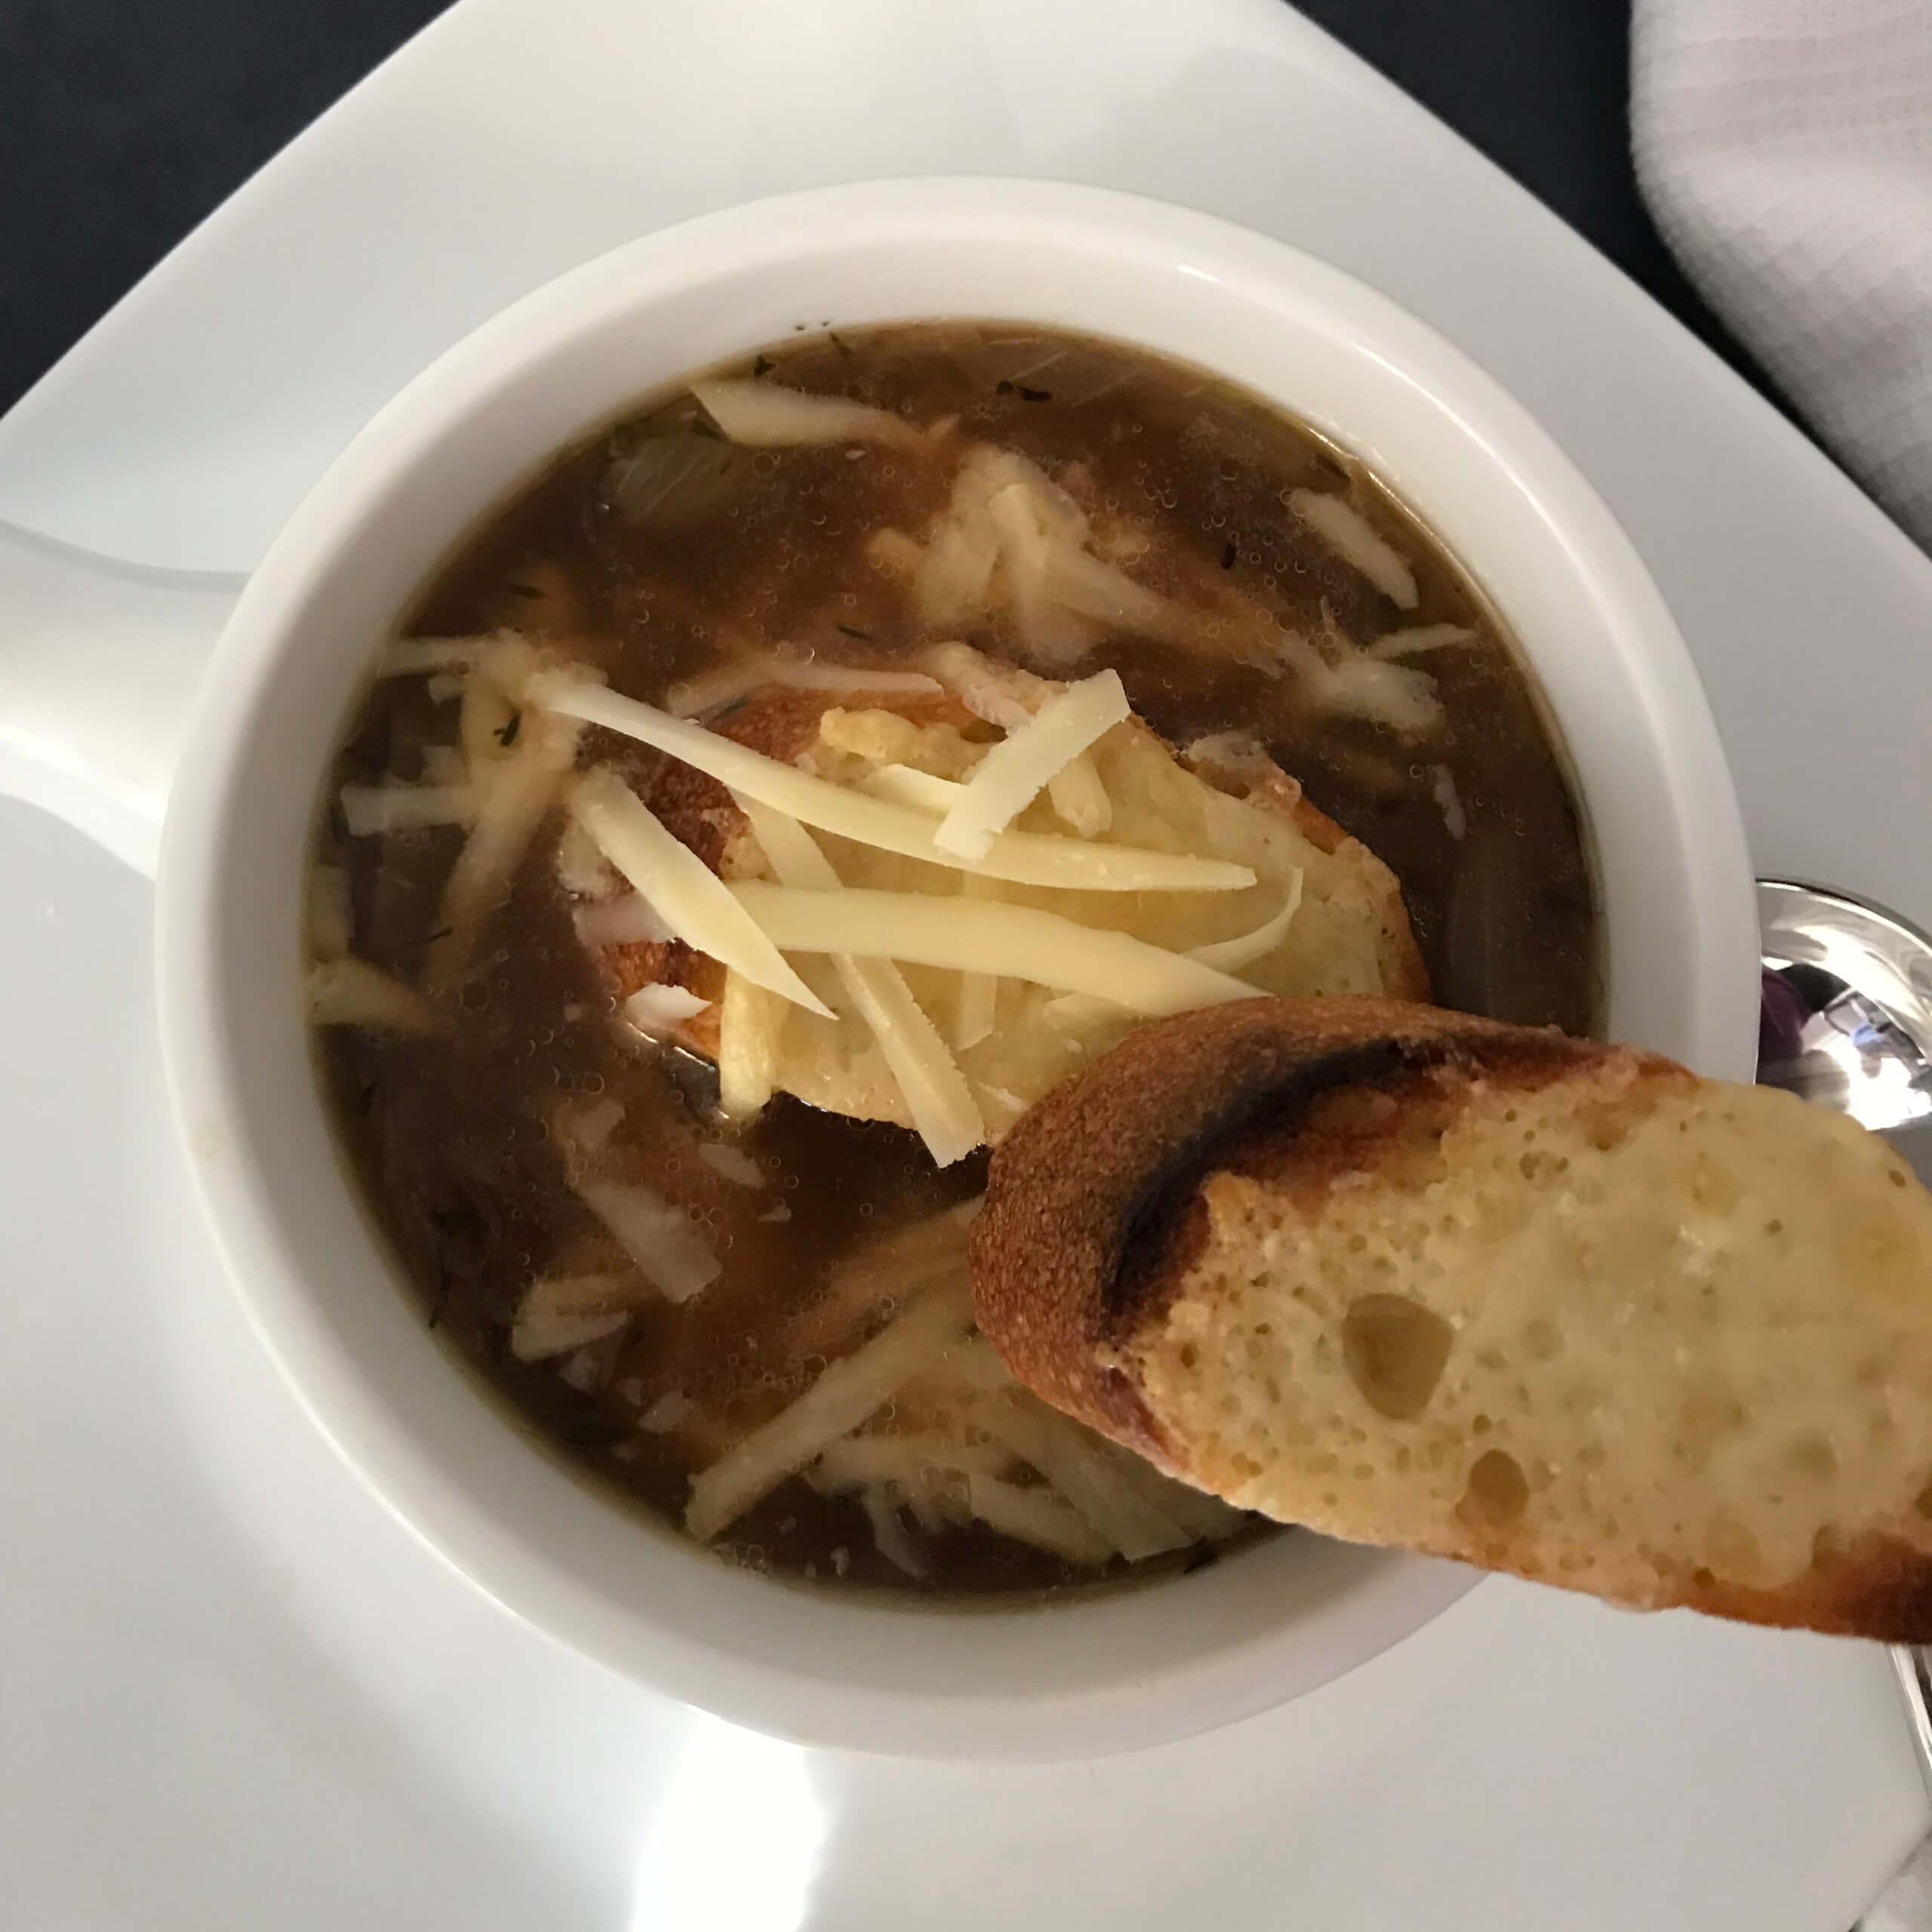 French Onion Soup Au Gratin | My Curated Tastes